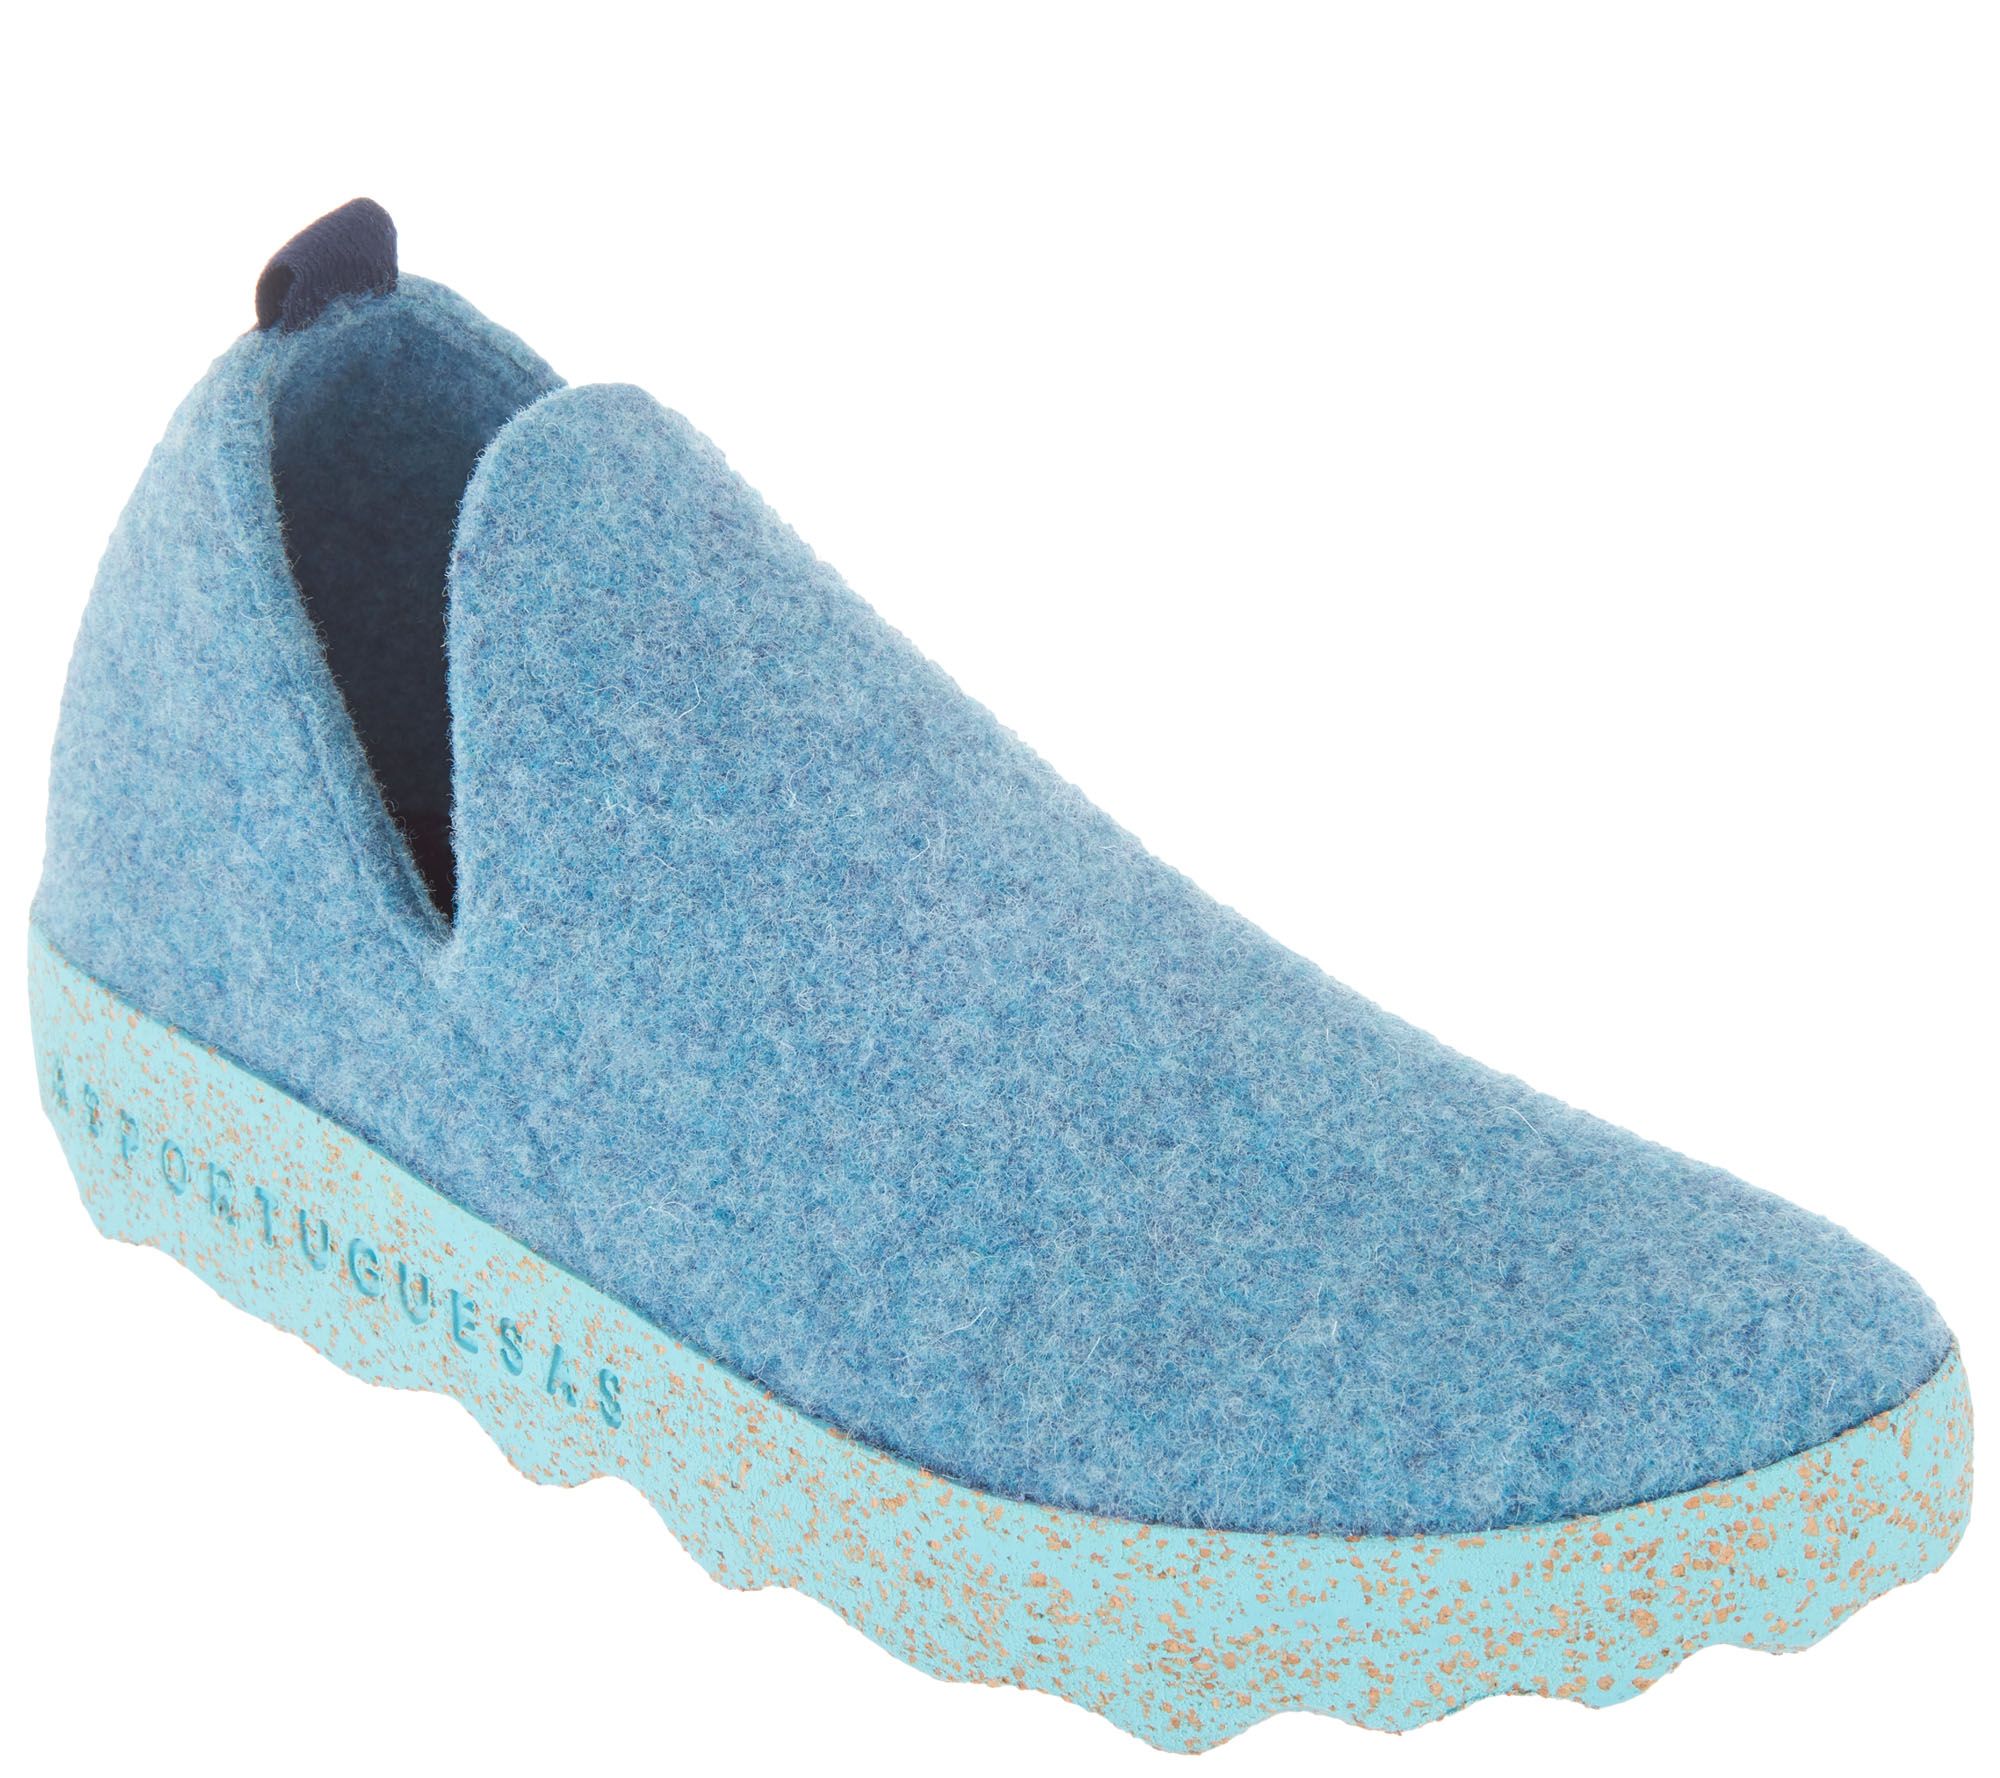 slip on wool shoes